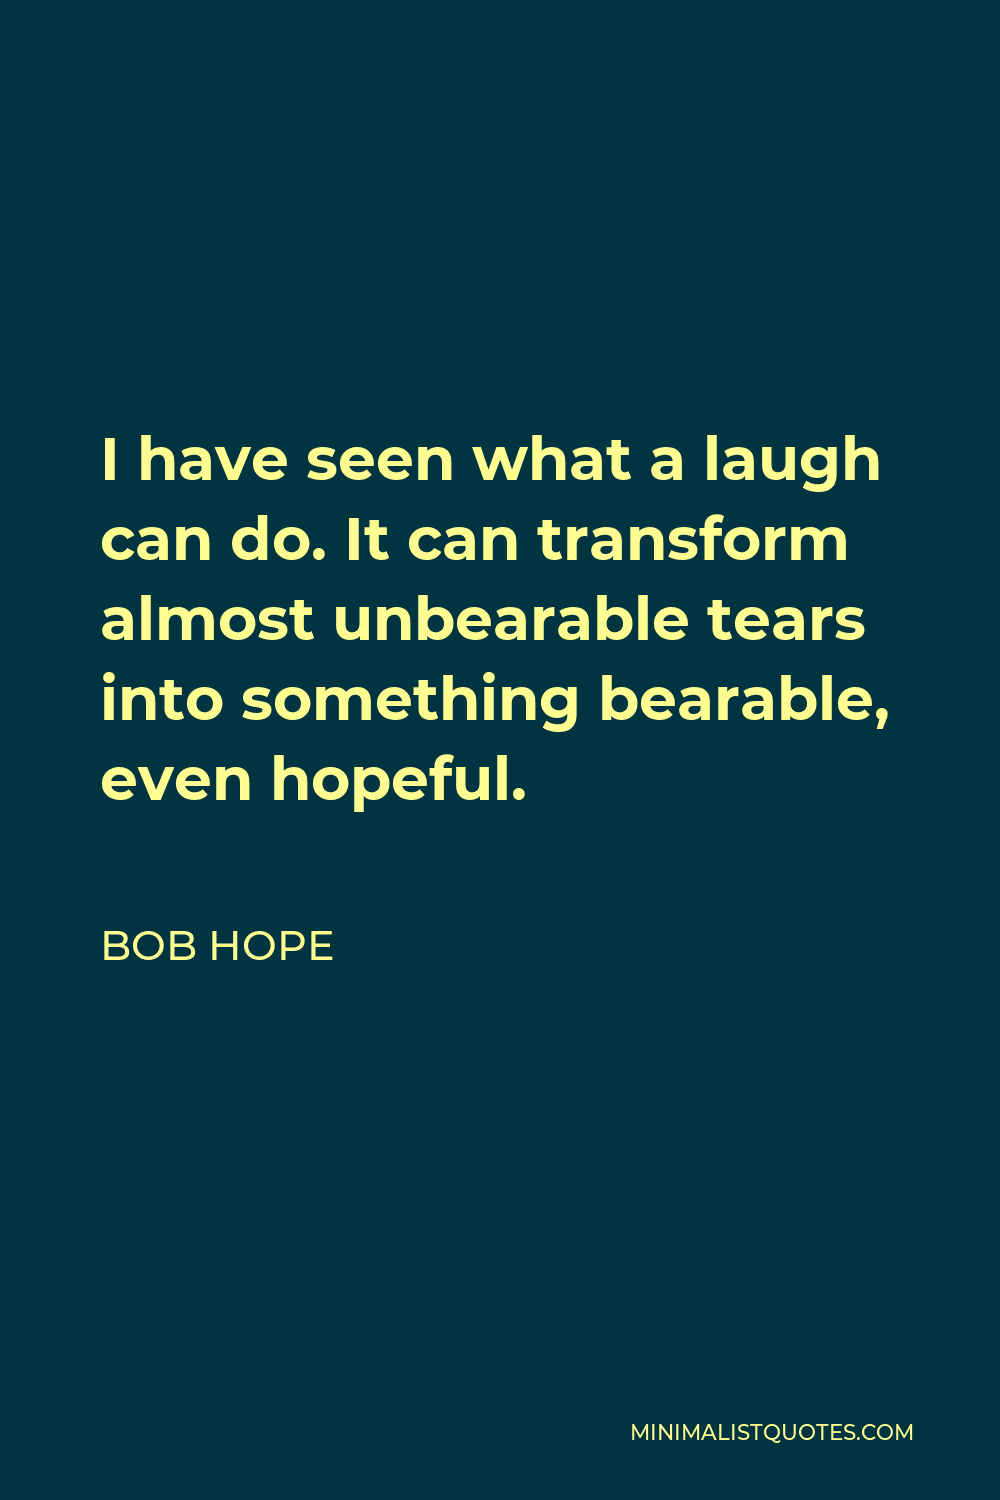 Bob Hope Quote - I have seen what a laugh can do. It can transform almost unbearable tears into something bearable, even hopeful.